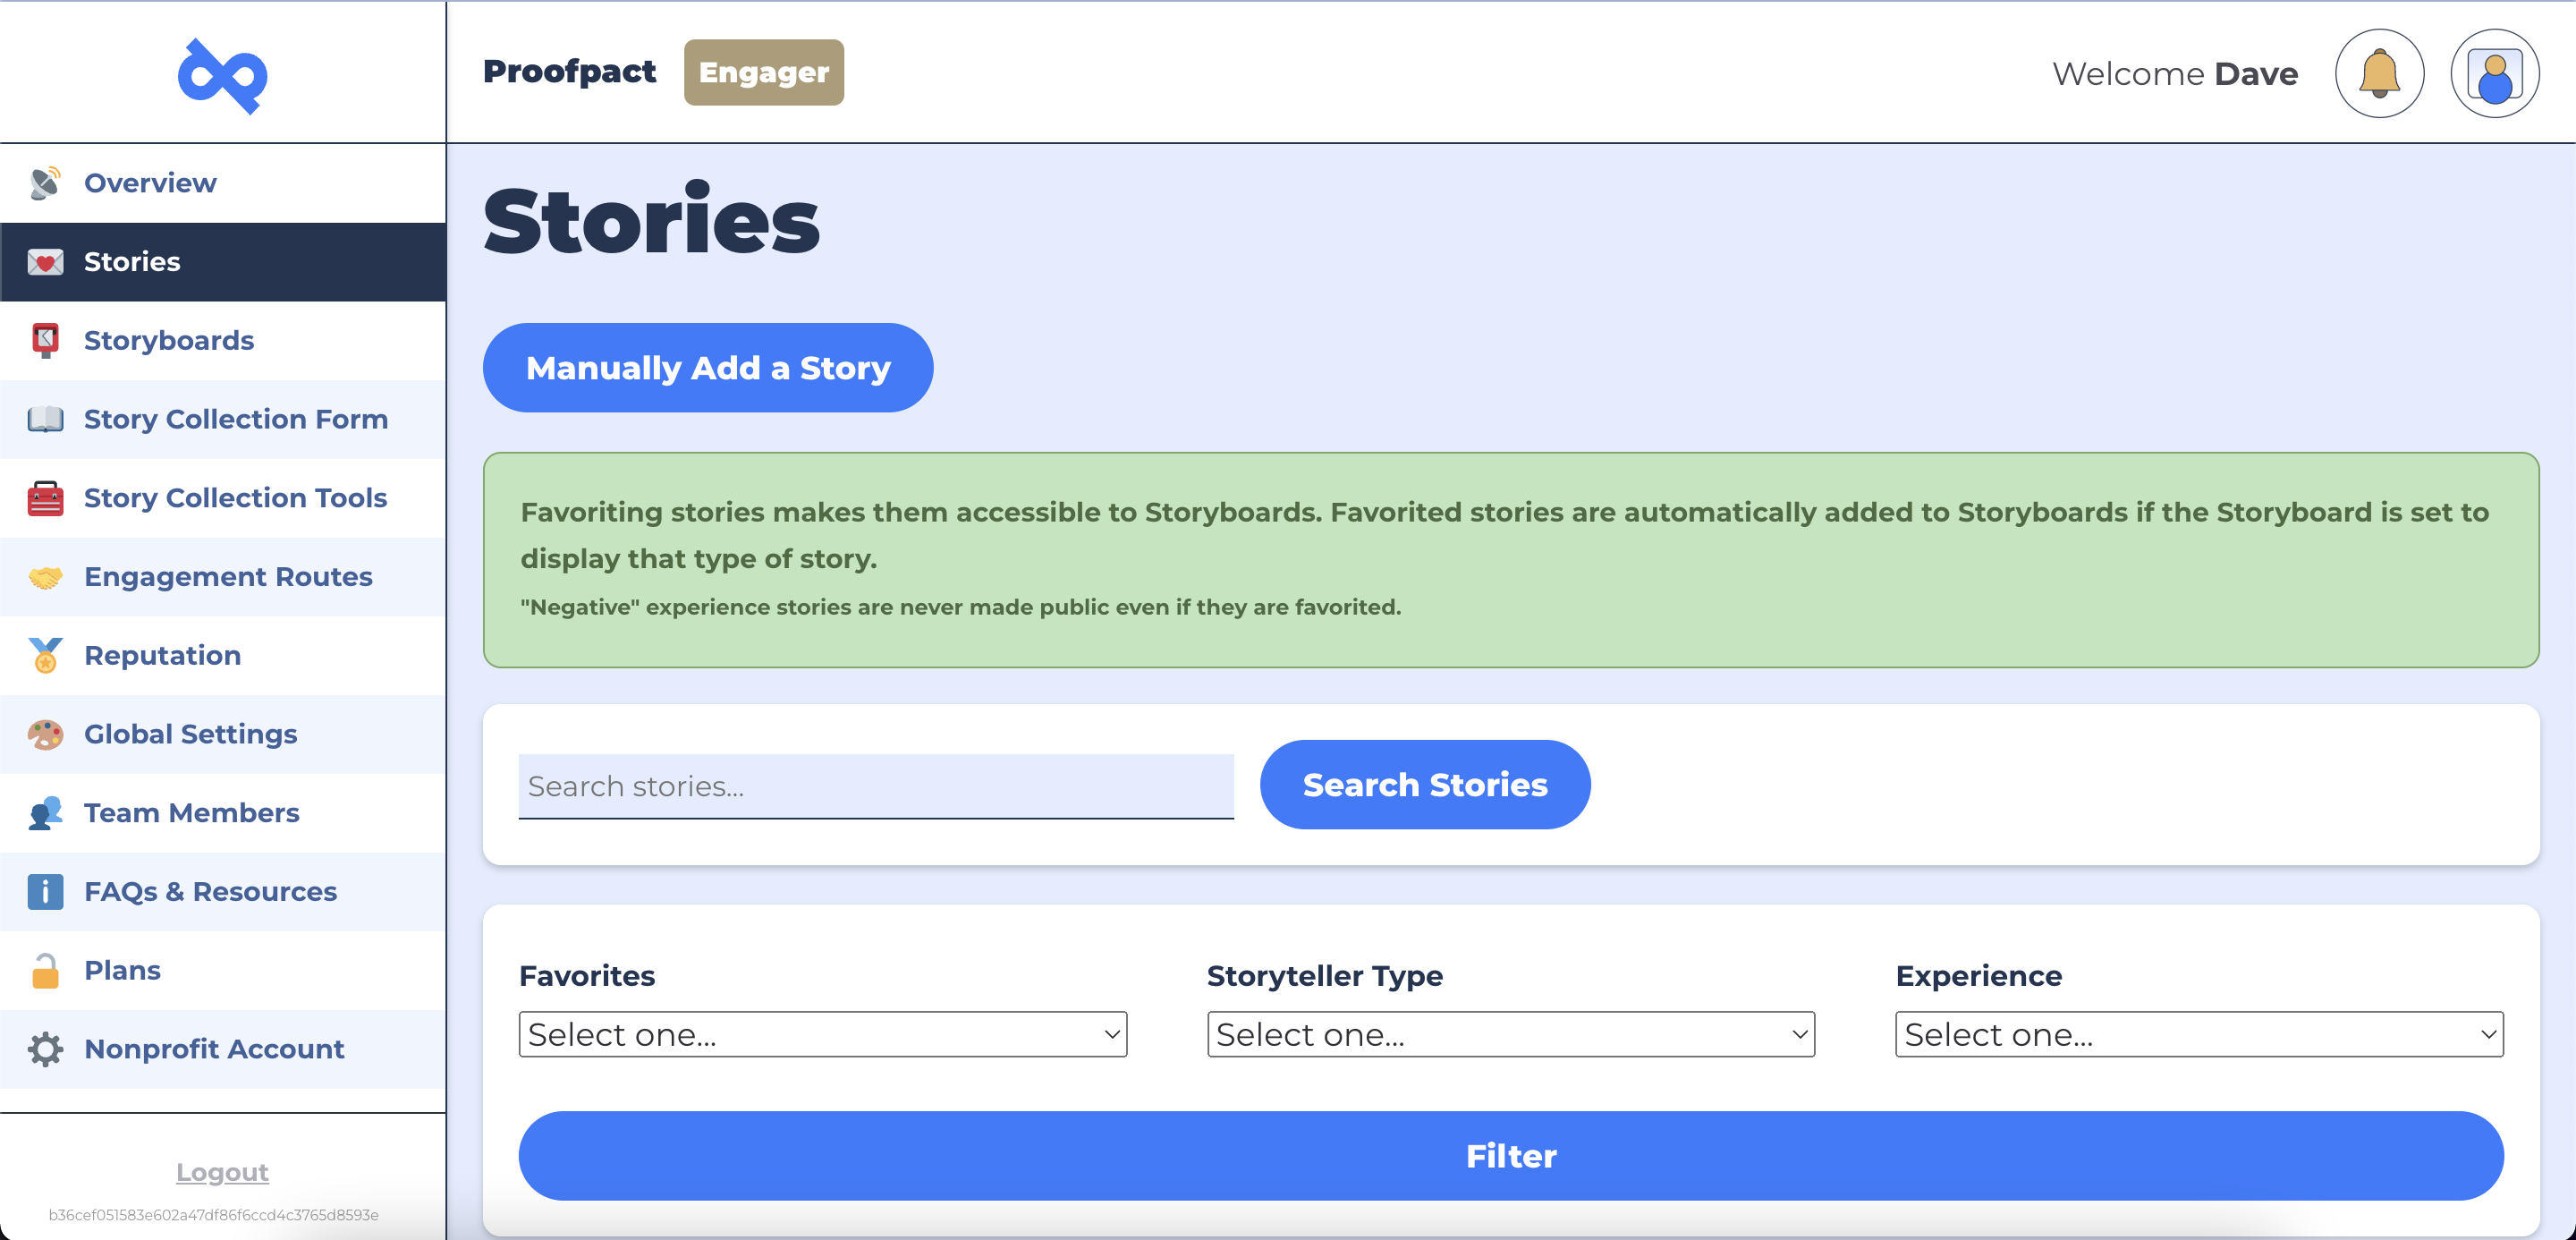 All of your nonprofit's stories in one dashboard! Easily search, filter, and find just the right story.